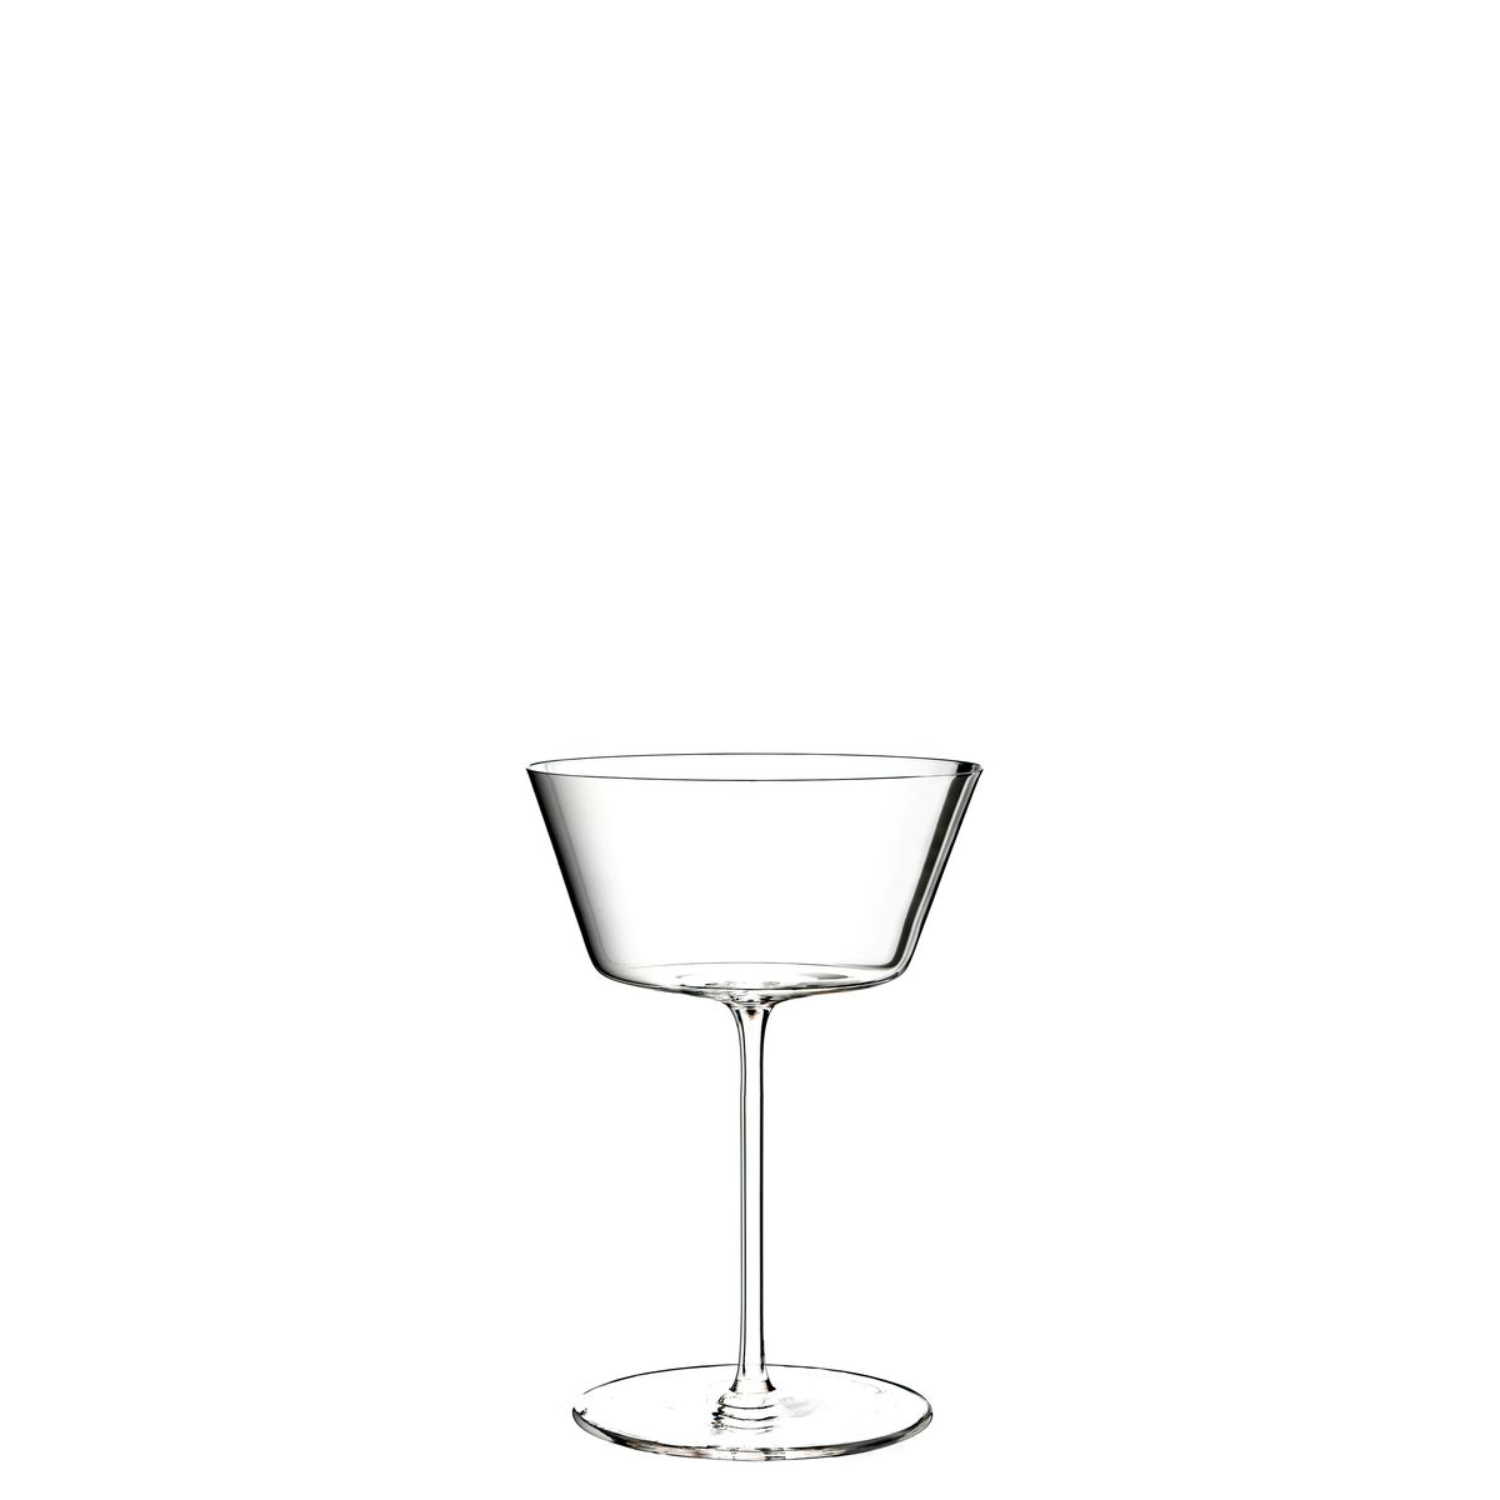 COMMODORE-CHAMPAGNE SAUCER IN BLOWN GLASS